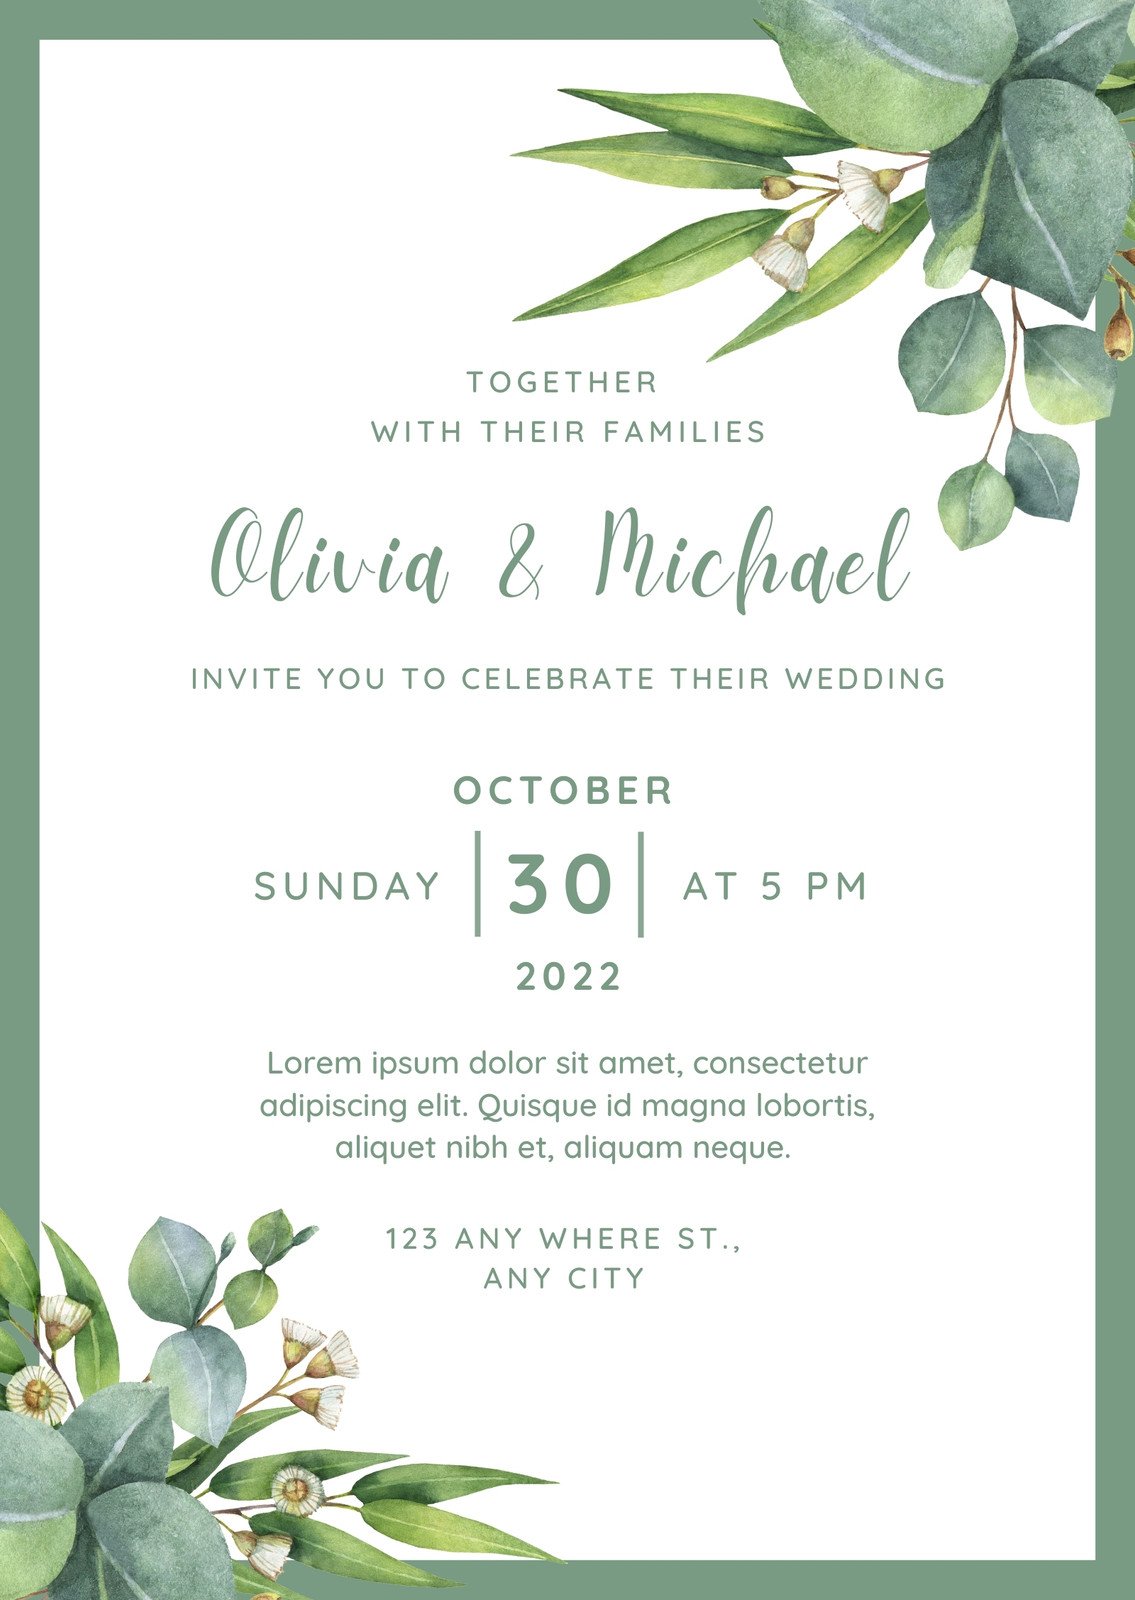 Page 4 - Wedding invitation templates to customize for free | Canva